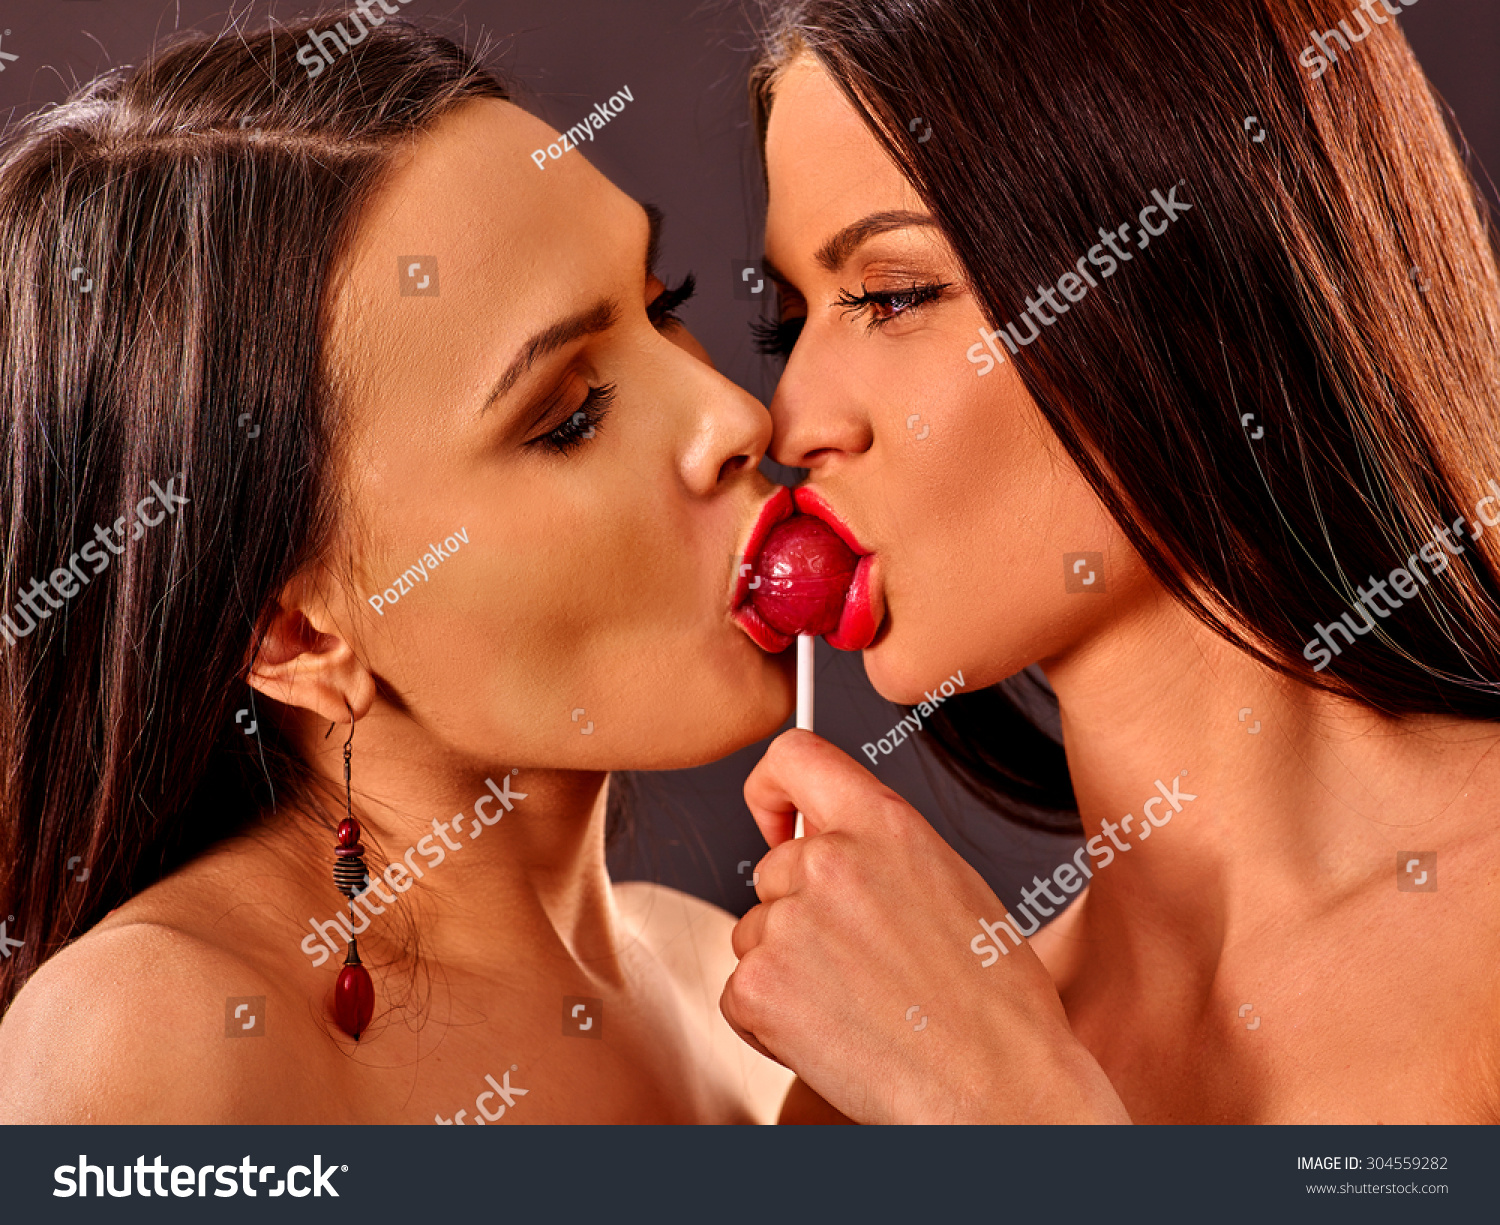 Foreplay Lesbians